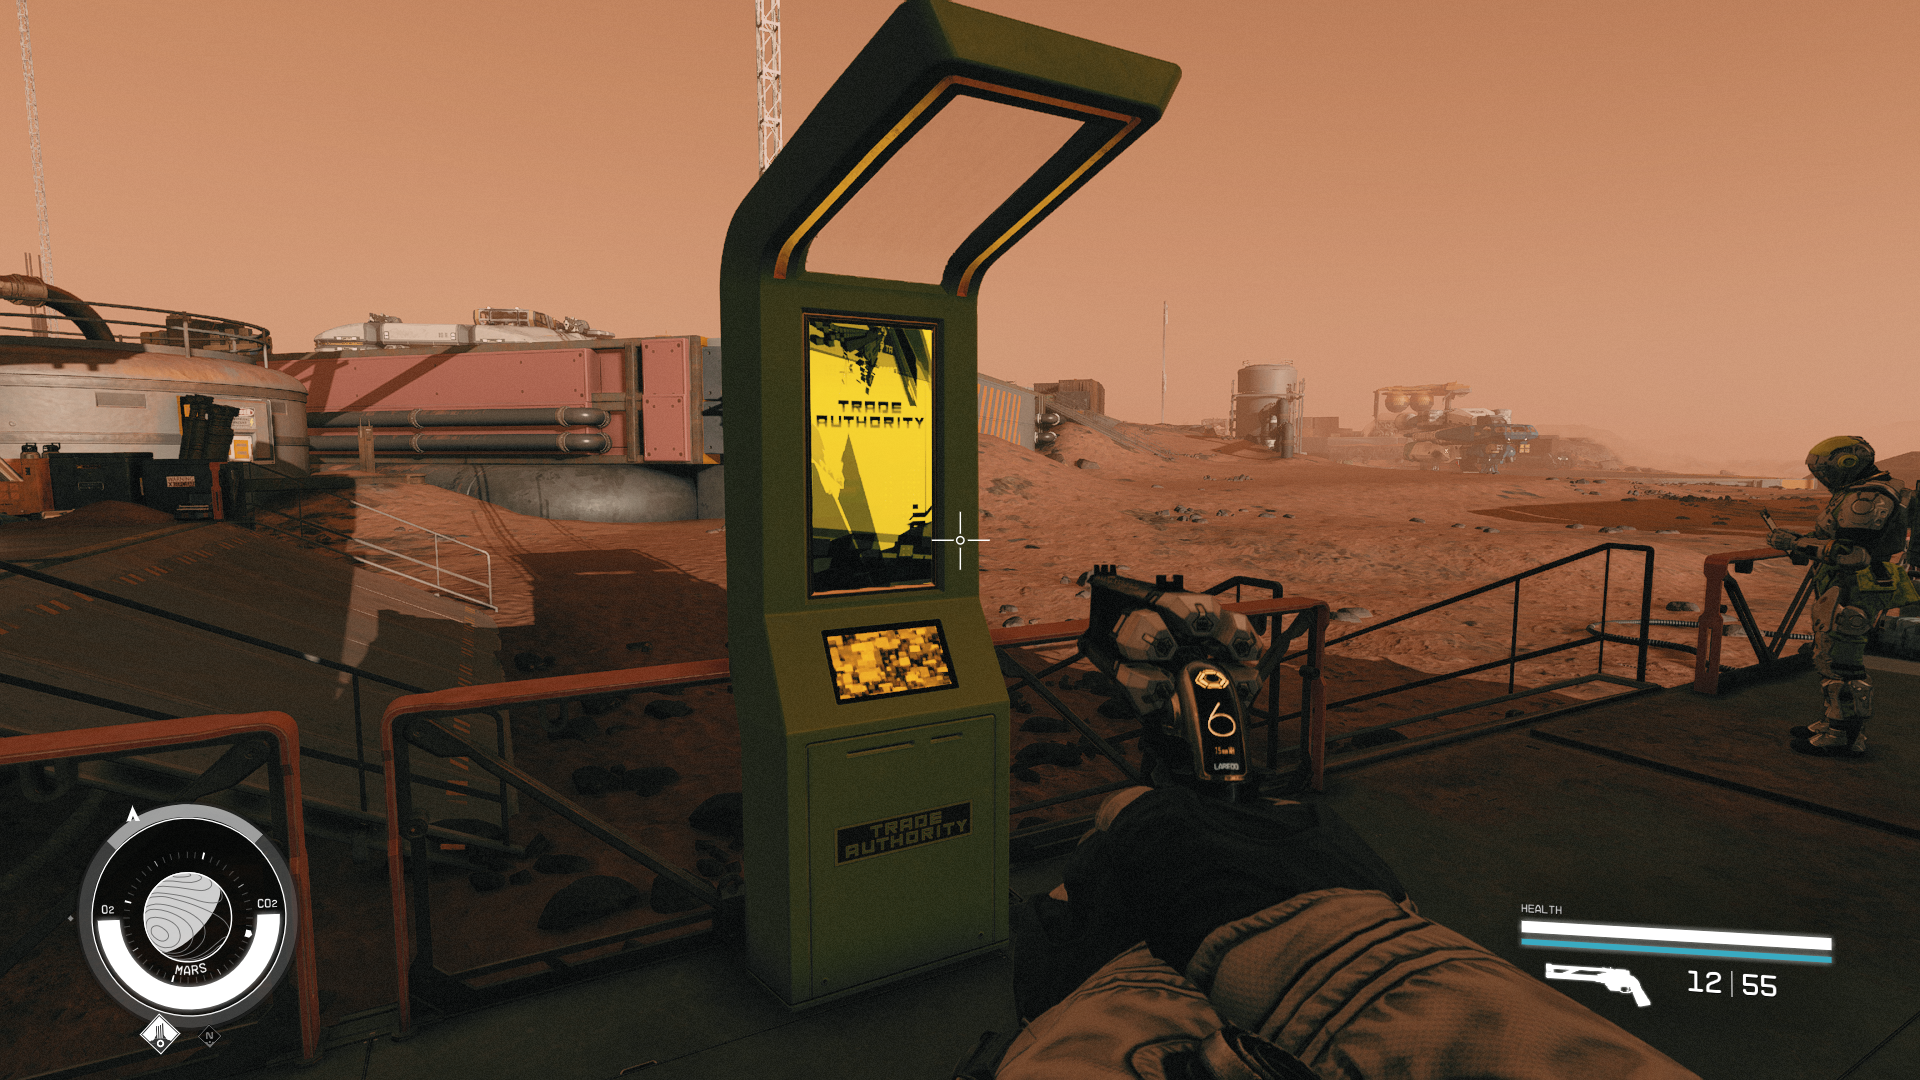 The Trade Authority Kiosk on Cydonia in Starfield